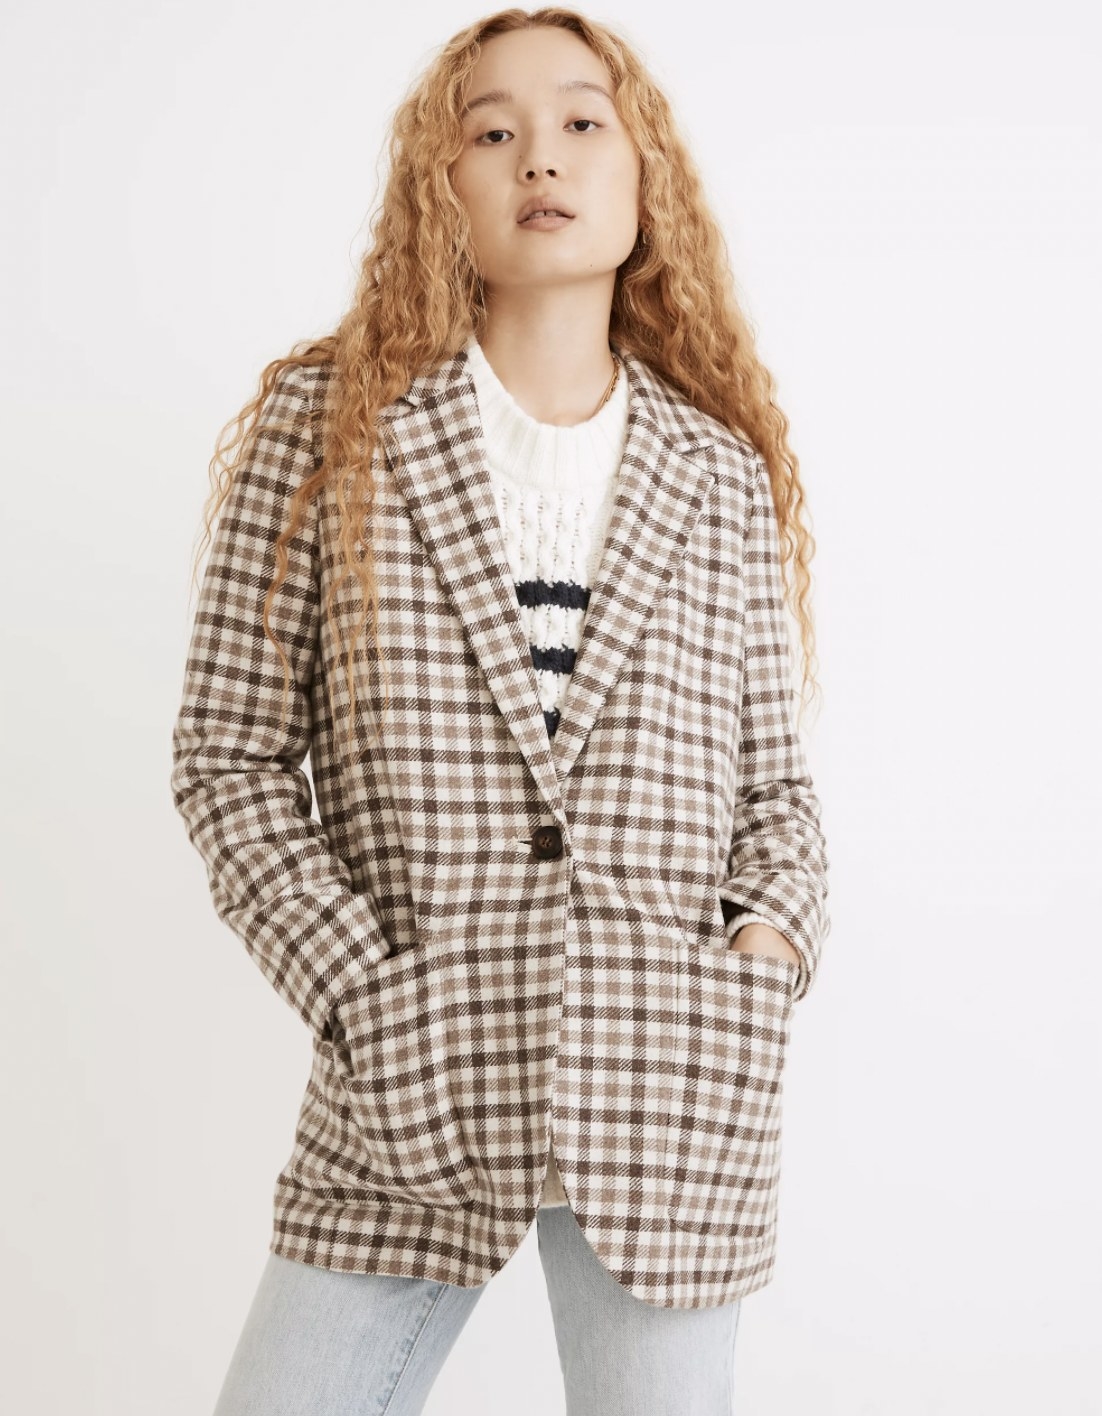 Model wearing the neutral-toned checkered blazer over a sweater with jeans